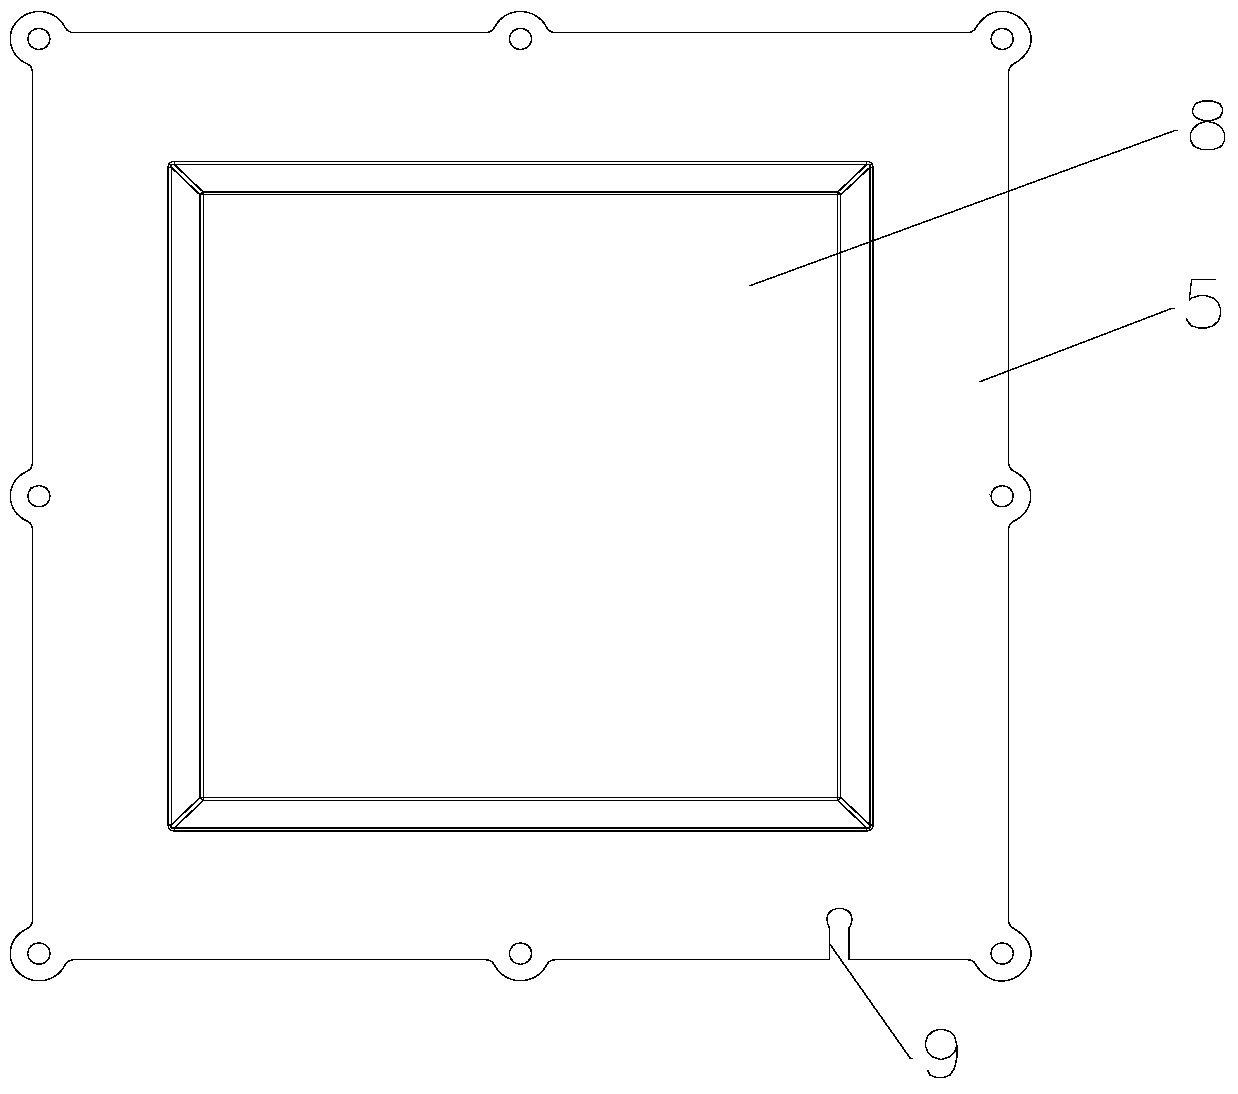 A square led downlight